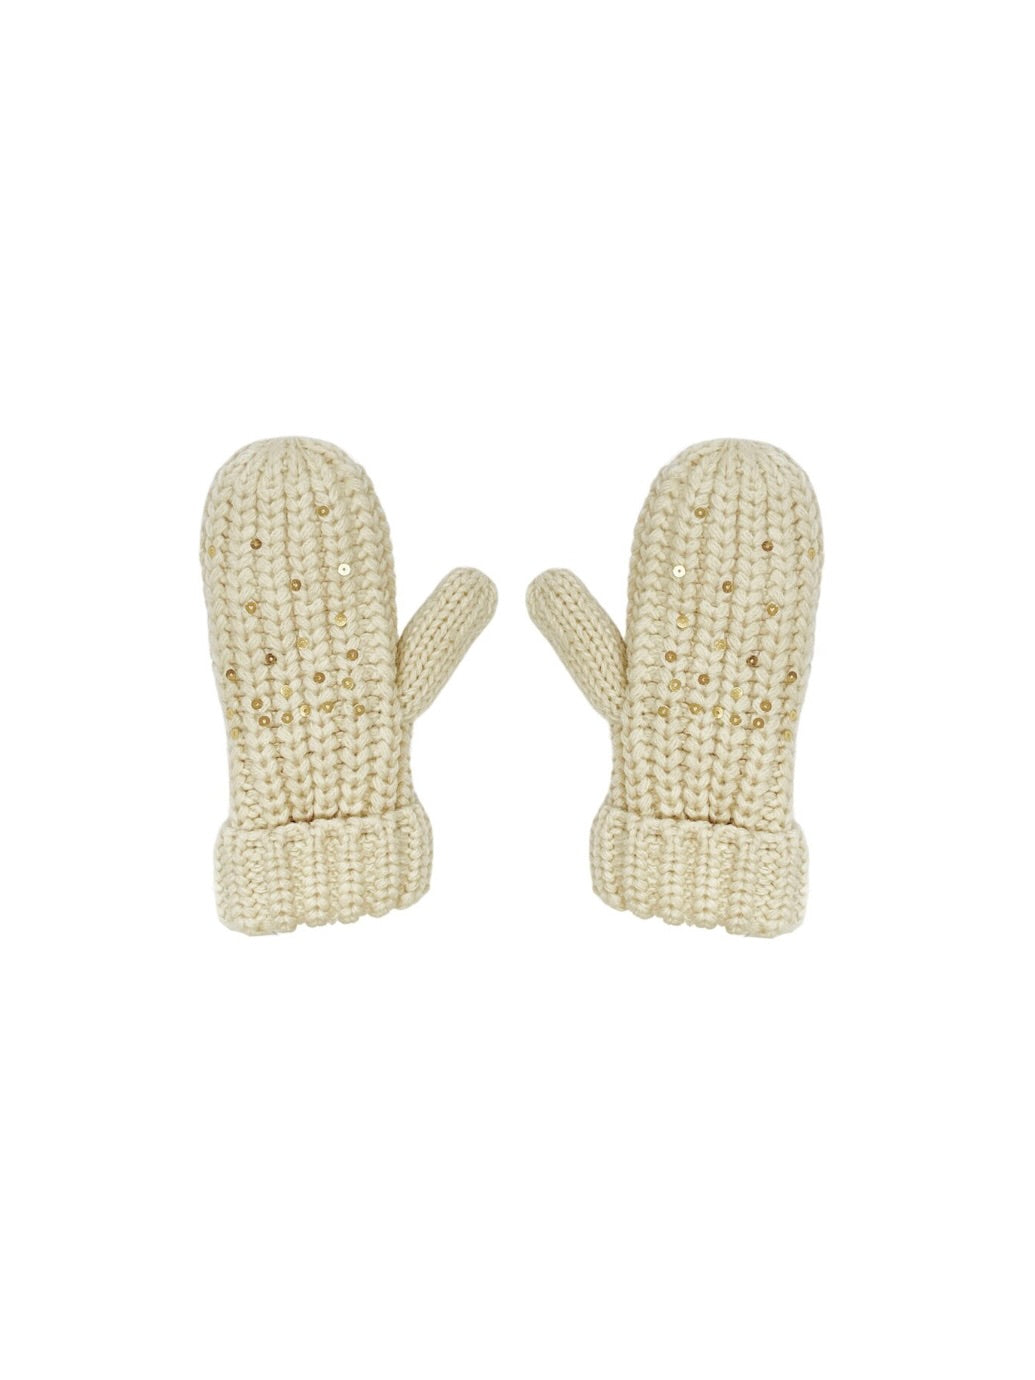 Shimmer Sequin Knitted Mittens